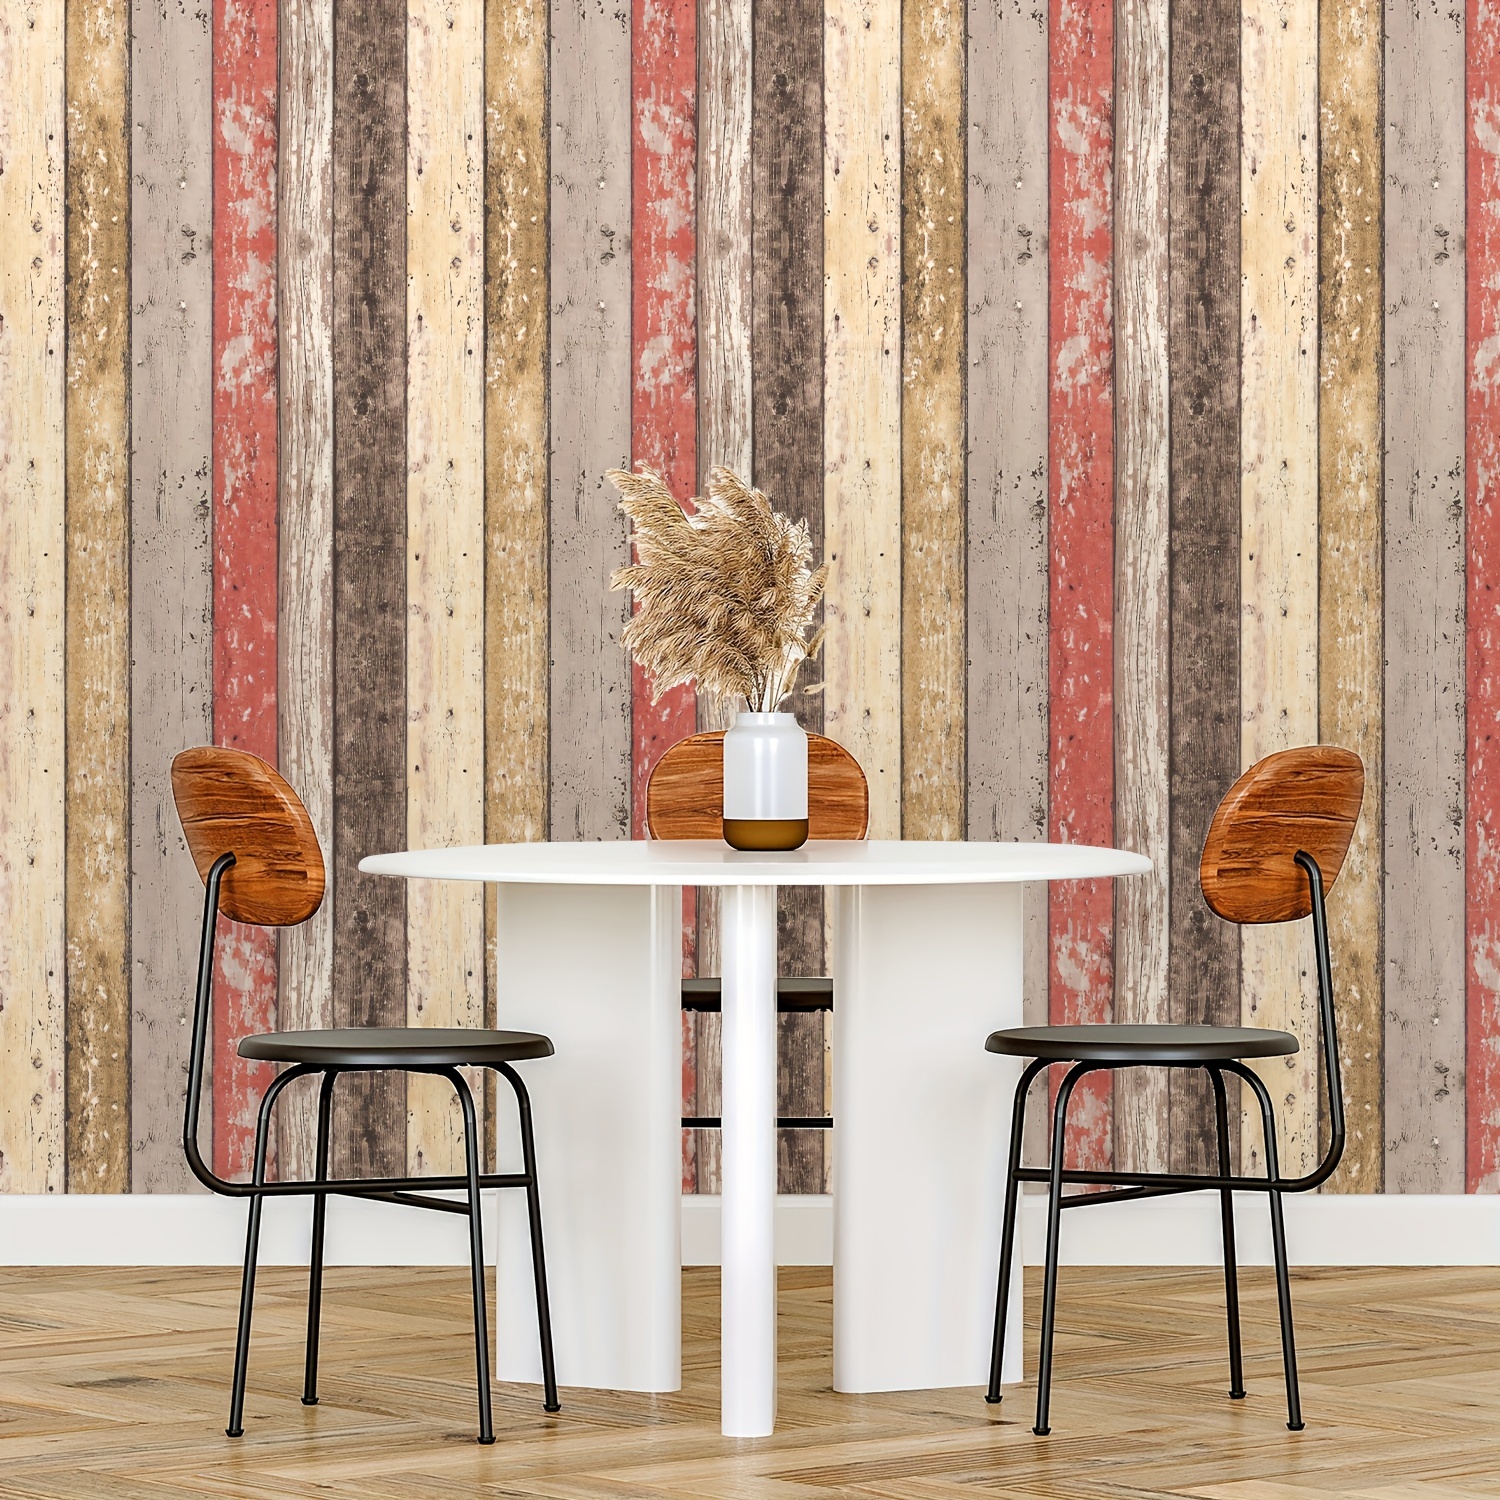 Best Removable Wallpaper For The Home — LIVEN DESIGN